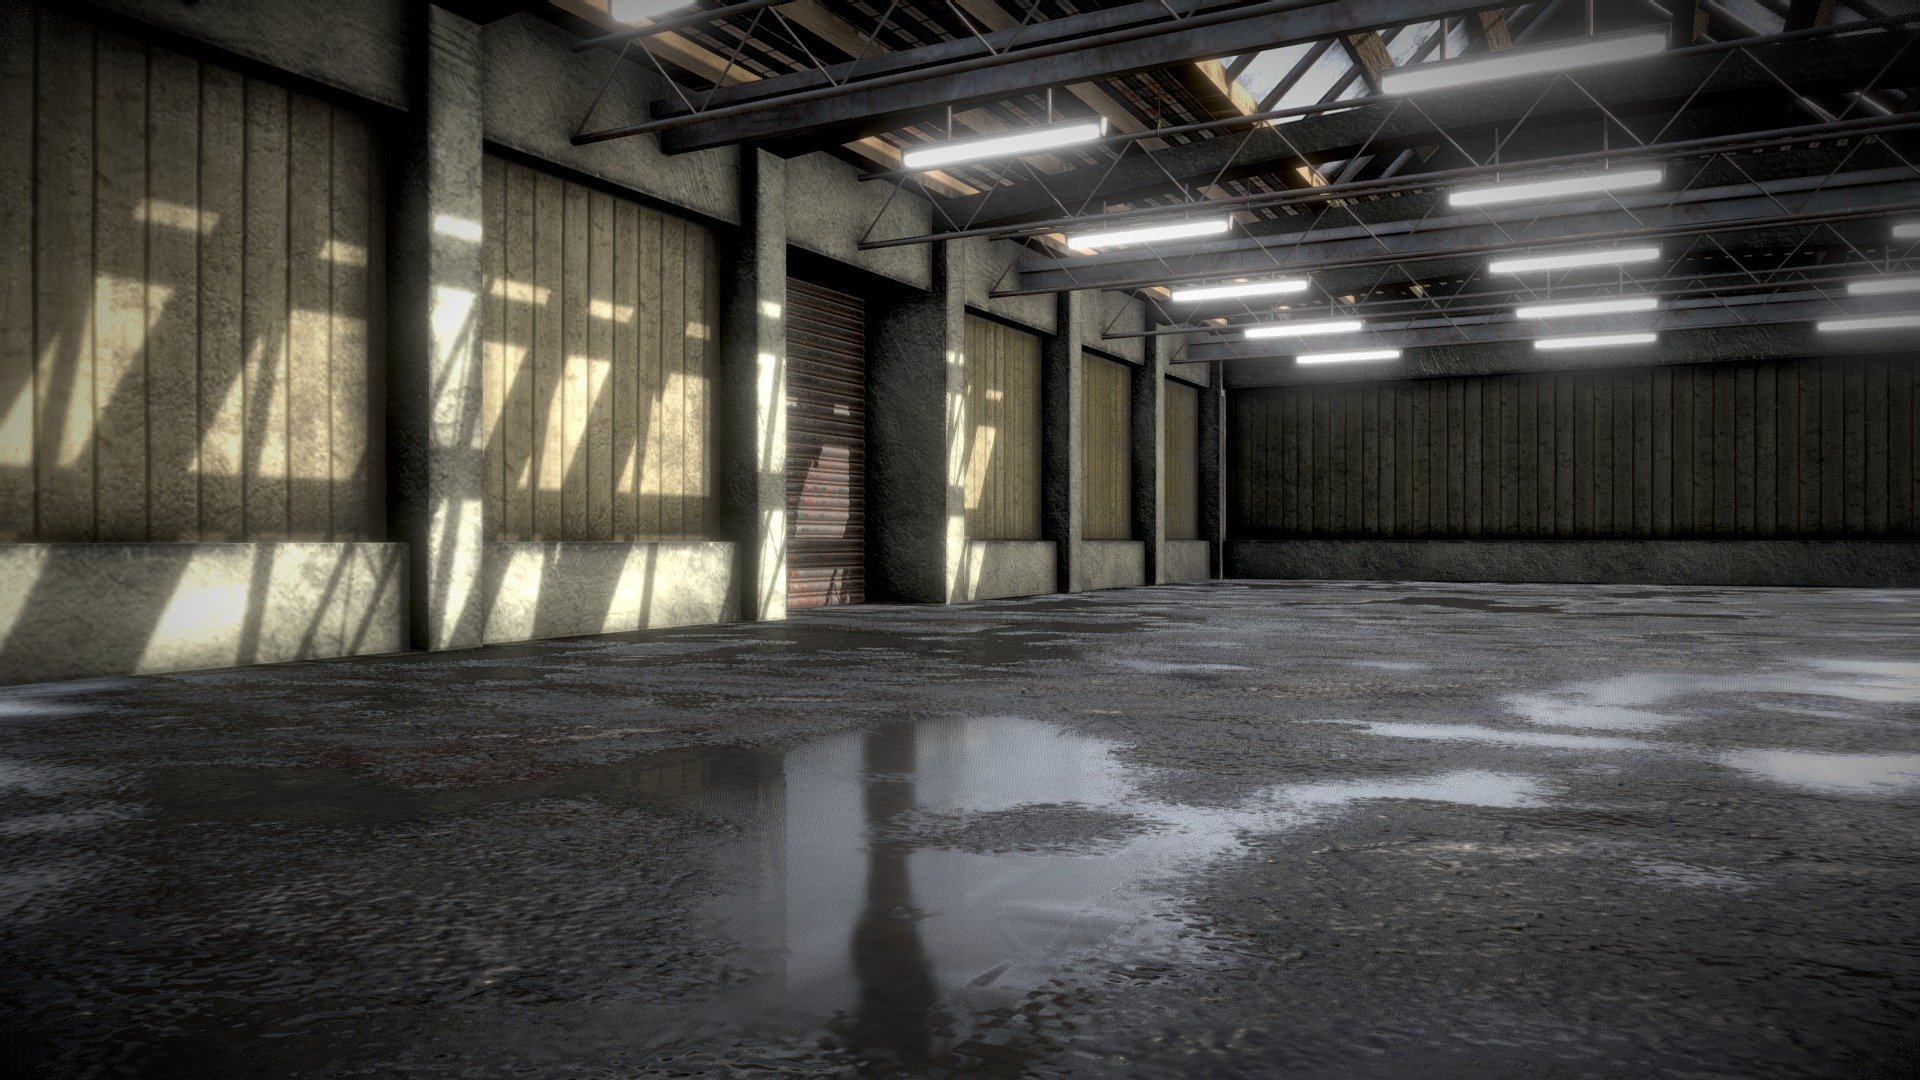 Love automotive rendering? Well your in for a treat! Render your cars in the &ldquo;Old Warehouse